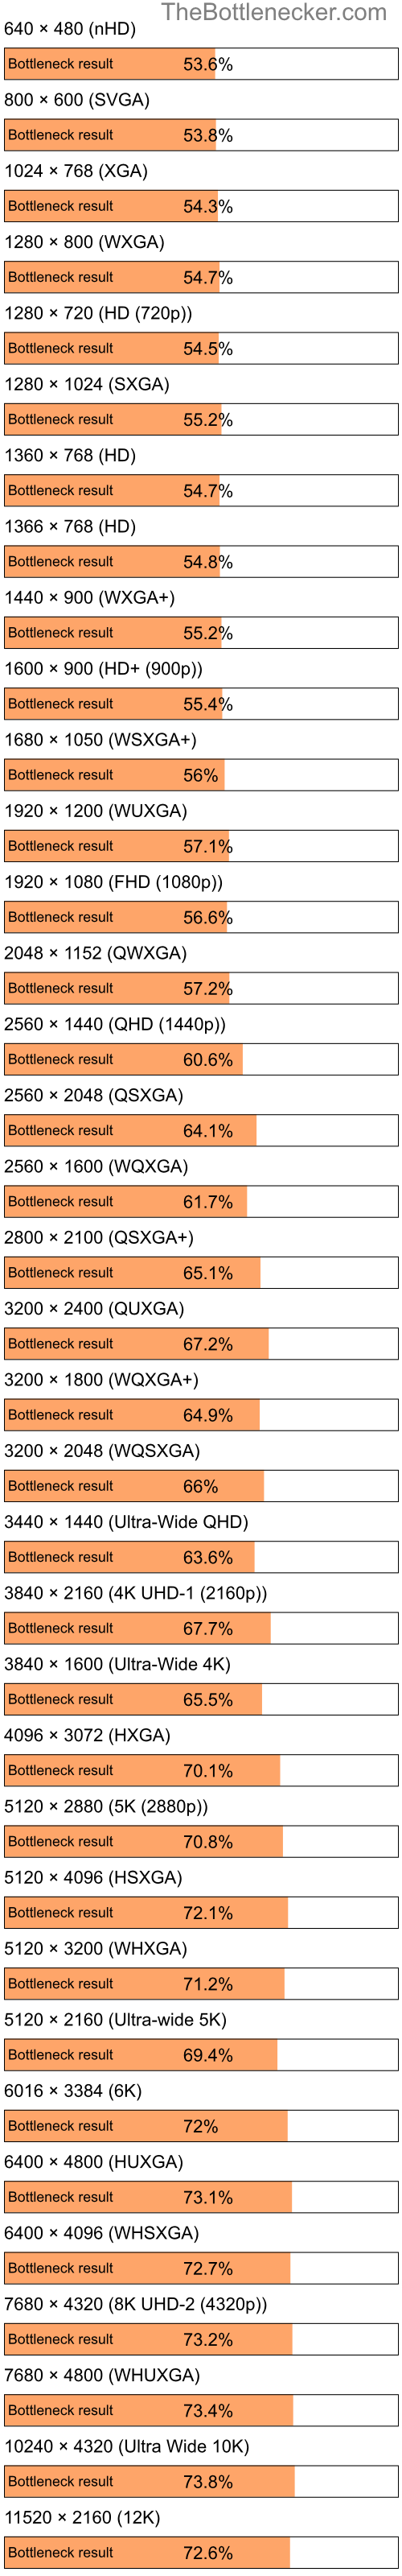 Bottleneck results by resolution for Intel Pentium 4 and AMD Radeon X700 PRO in Processor Intense Tasks